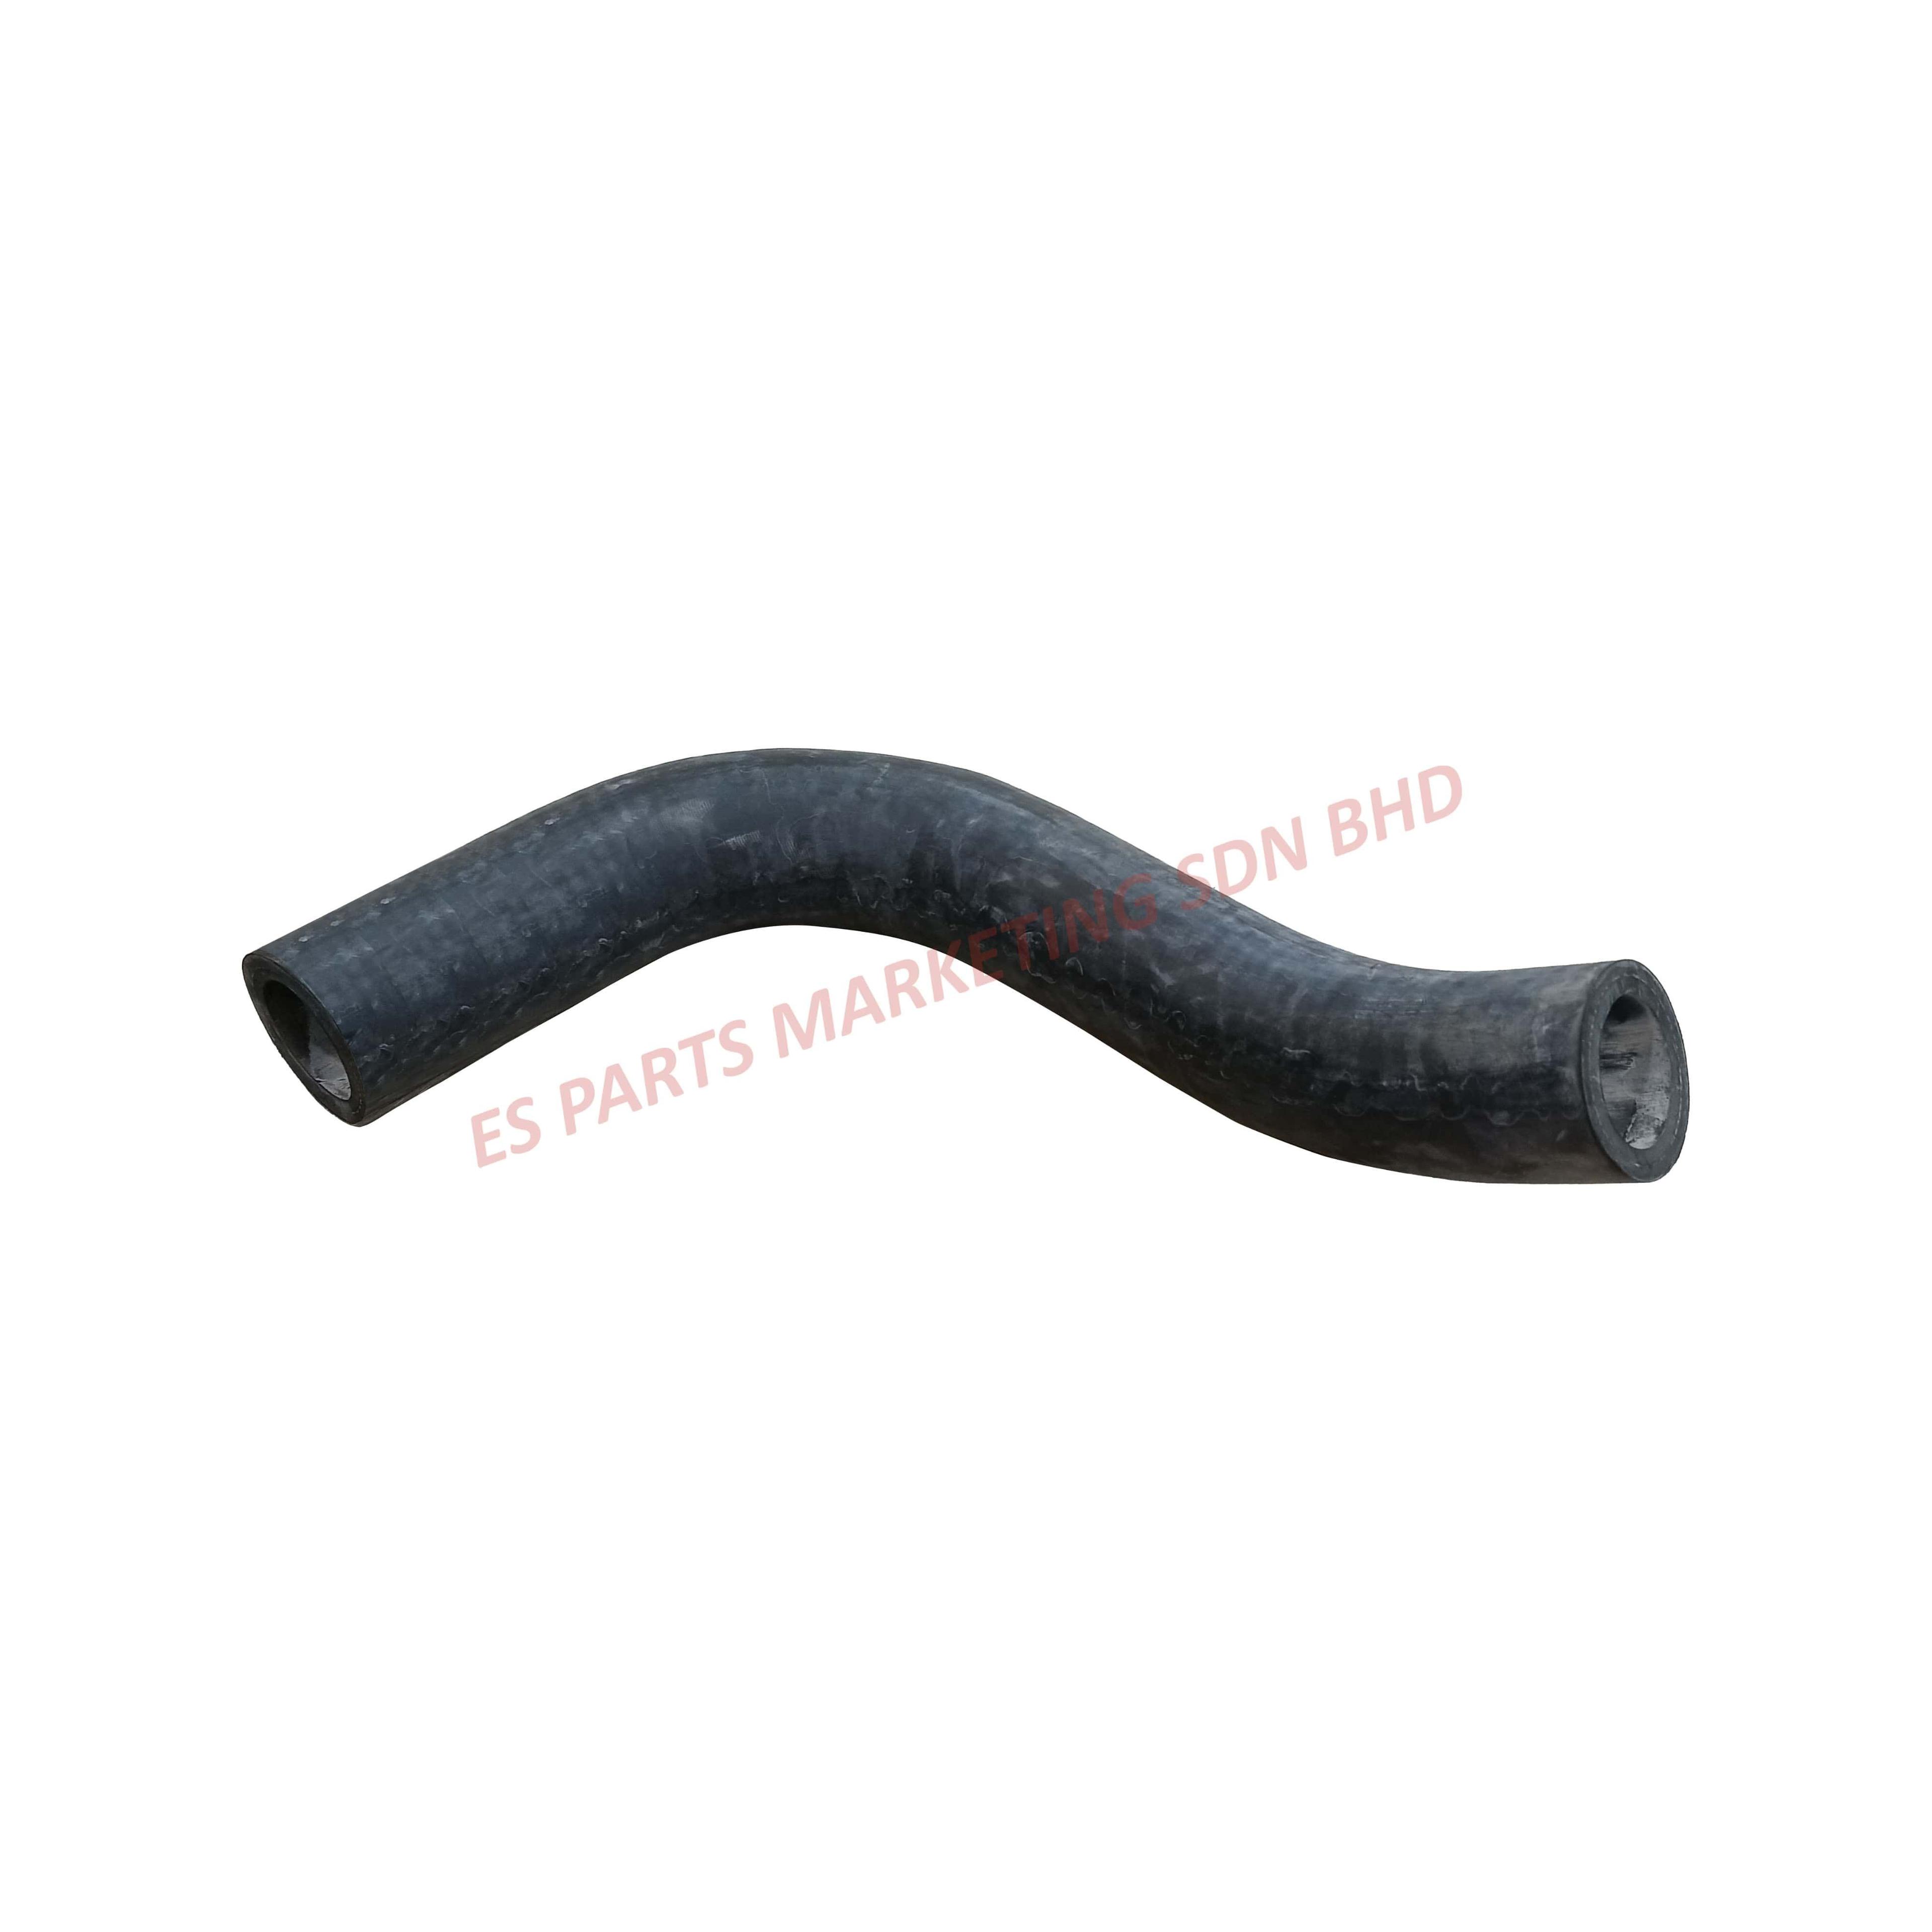 Hino K13C (27300) Spare Tank Hose (30mm x 30mm x 375mm) HNST-1011